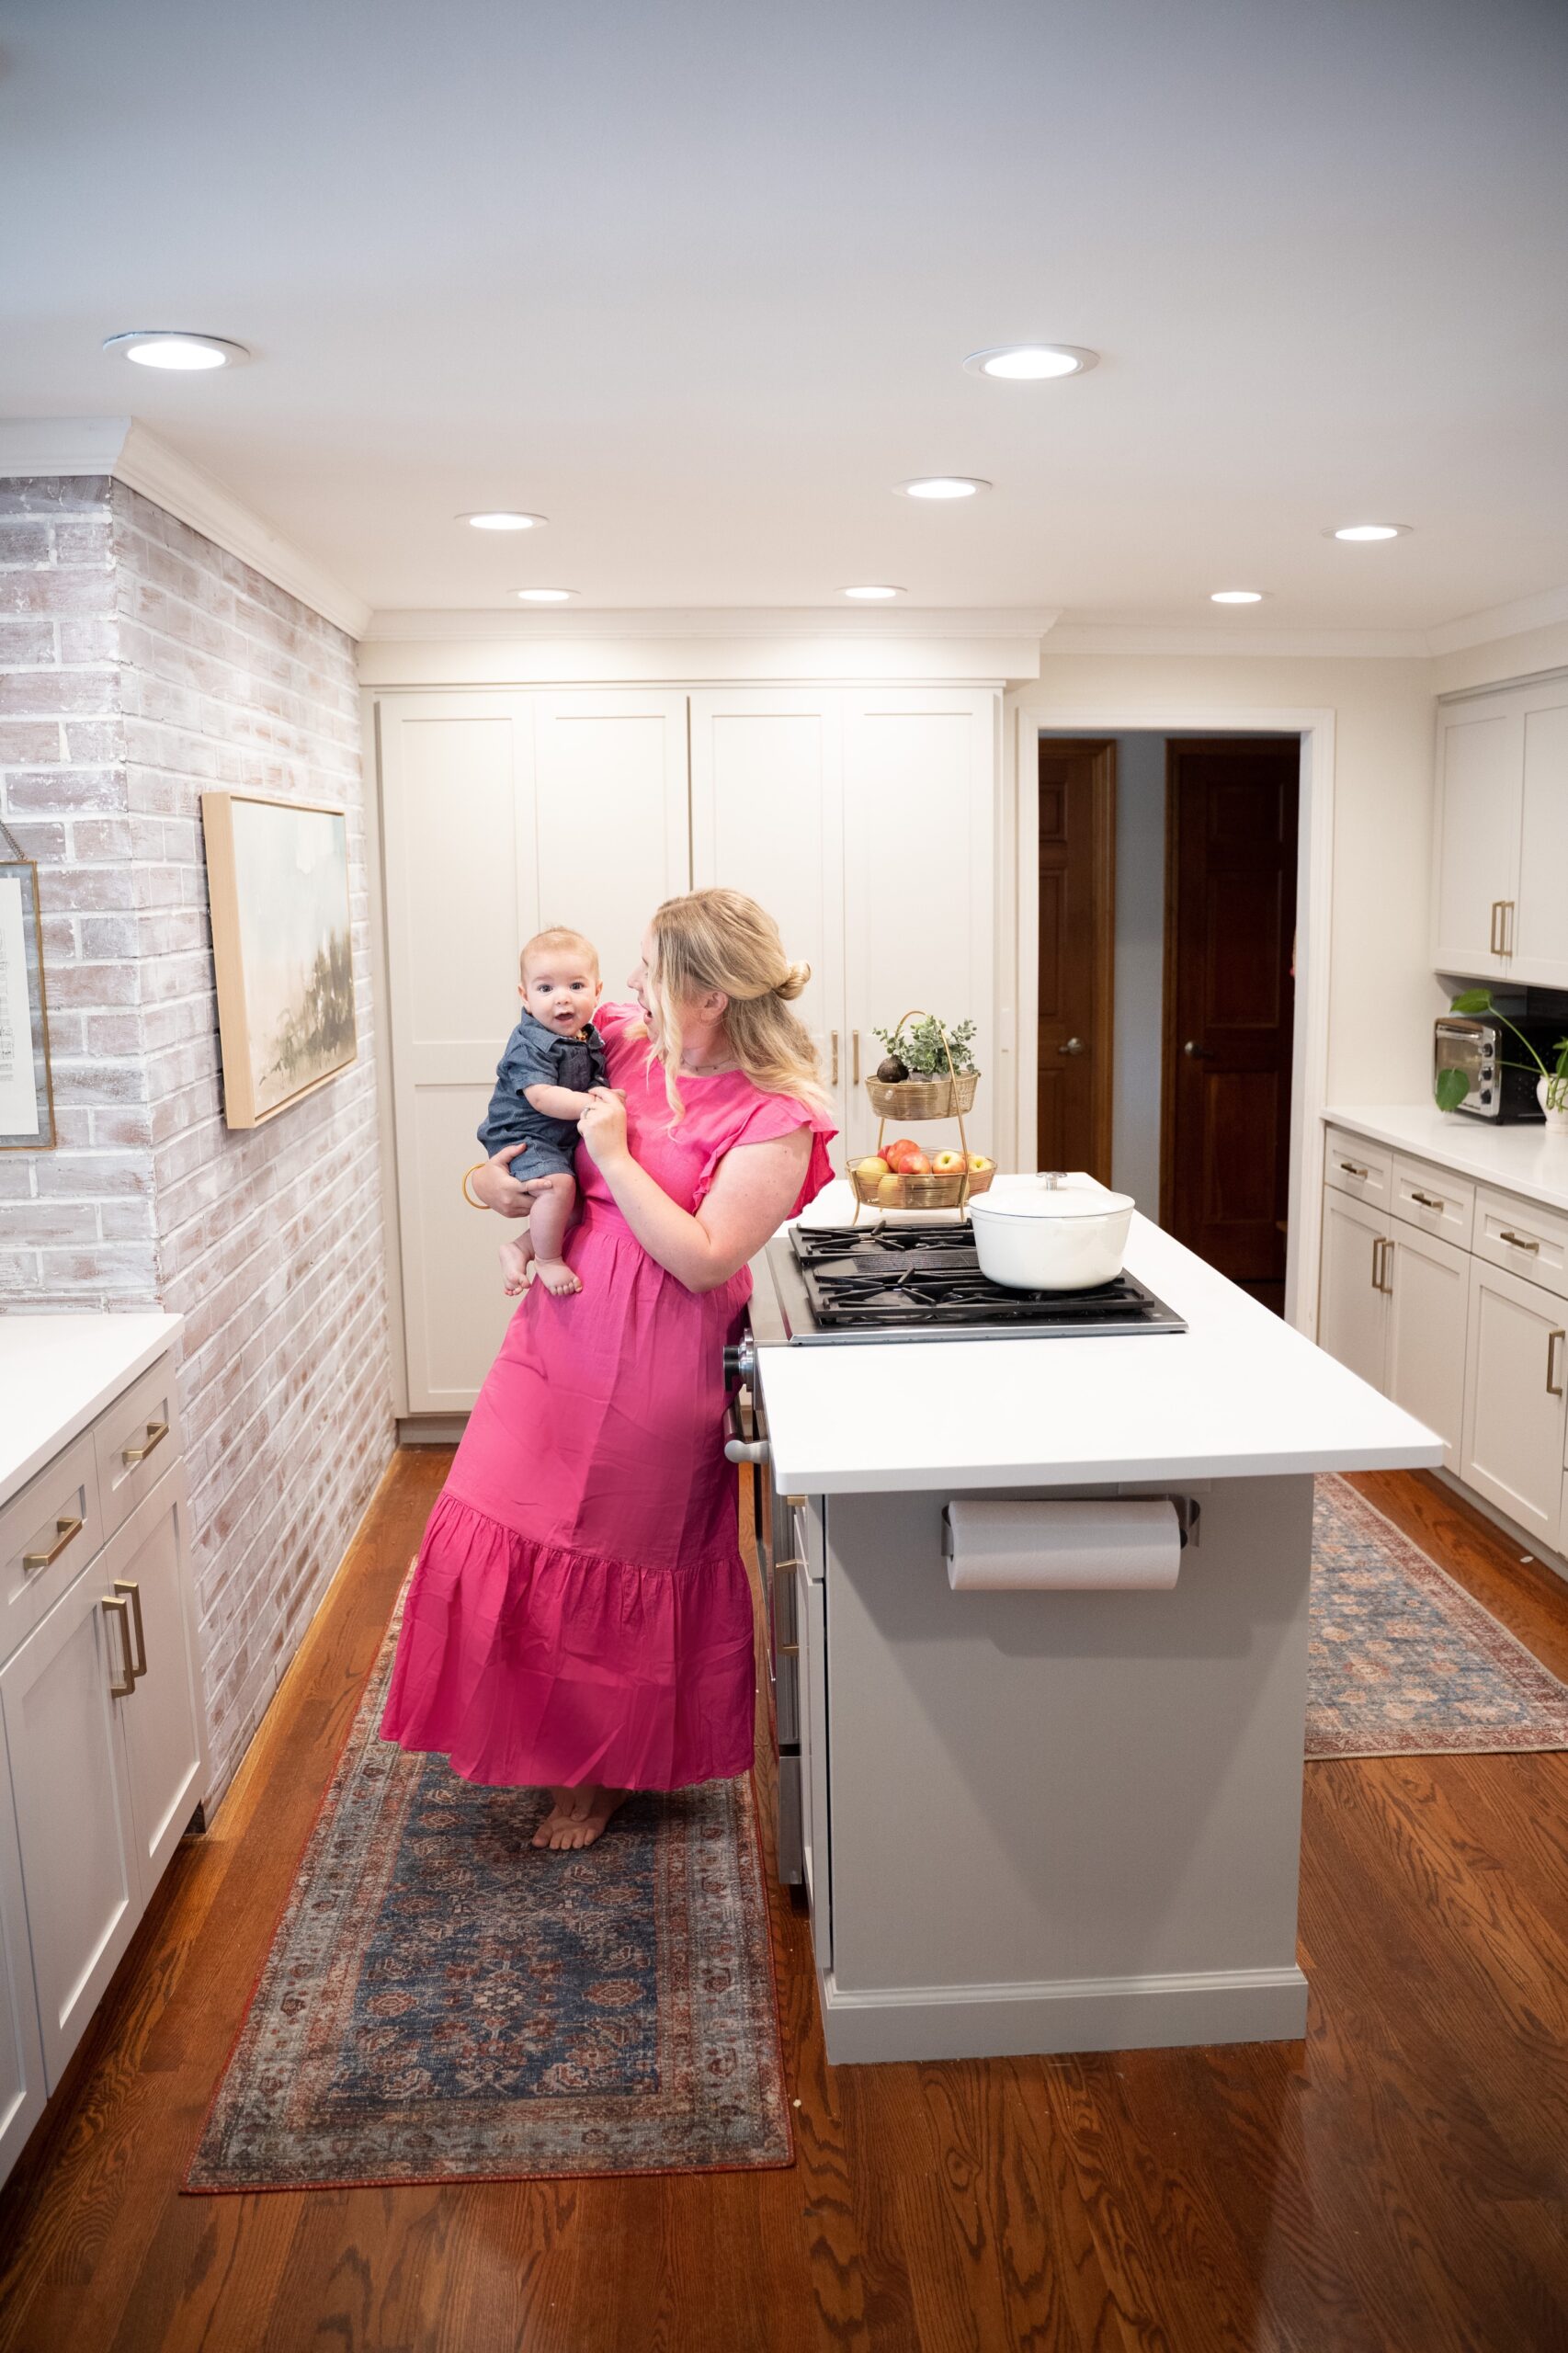 Woman and baby together at kitchen island